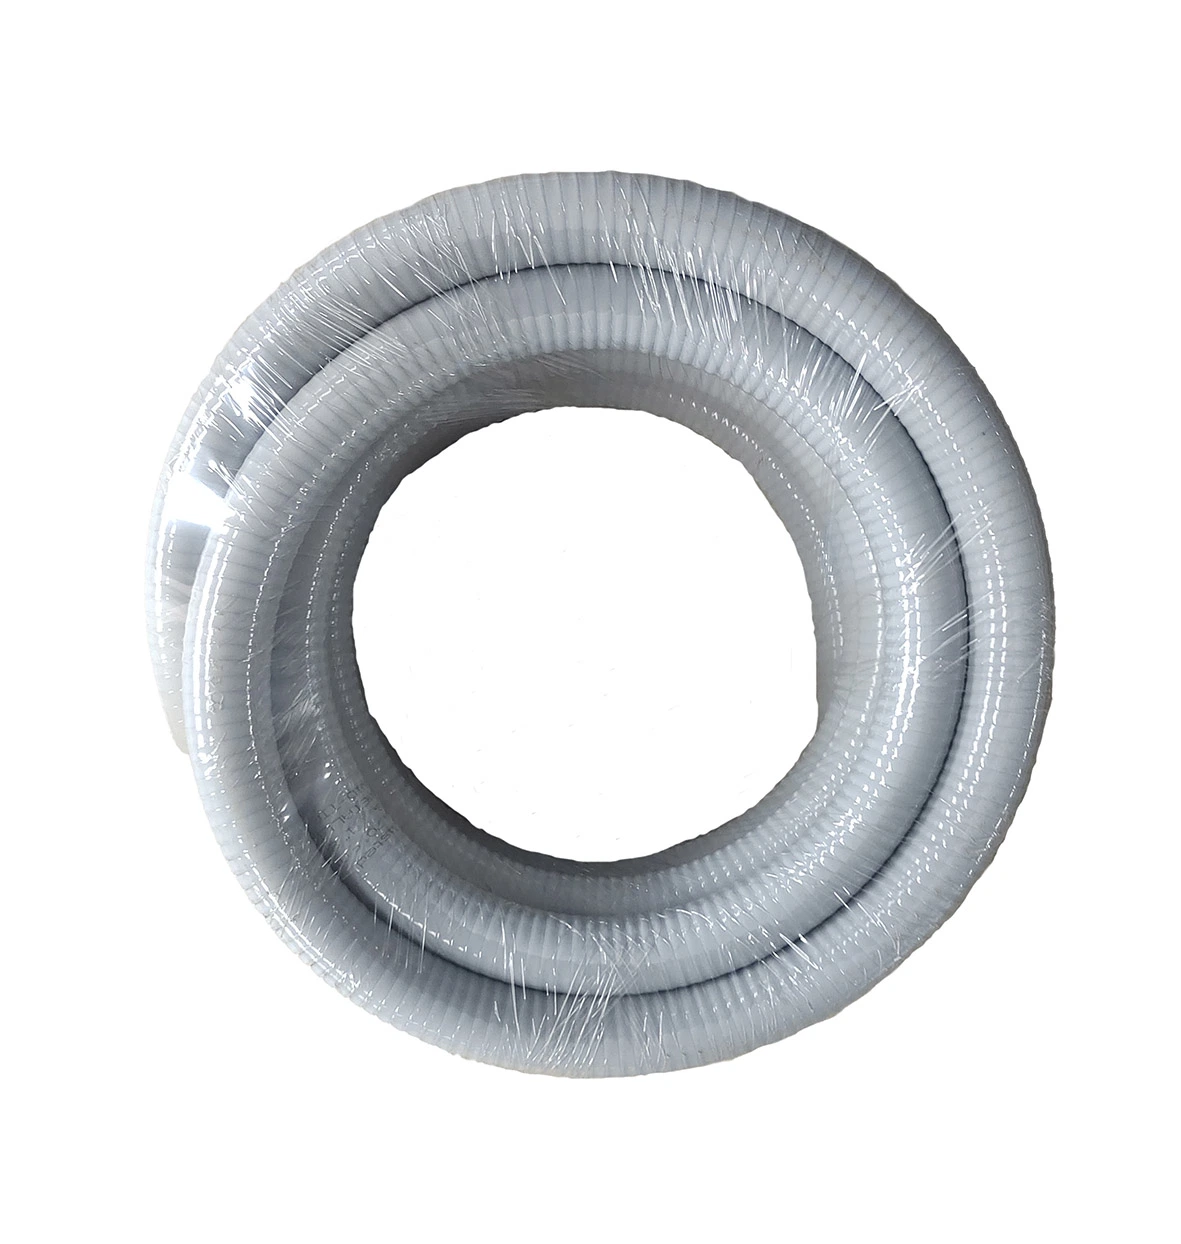 PVC Flexible Dental Suction Hose Dental Chair Wire and Cable Protection Tube PVC Corrugated Soft Hose Pipe